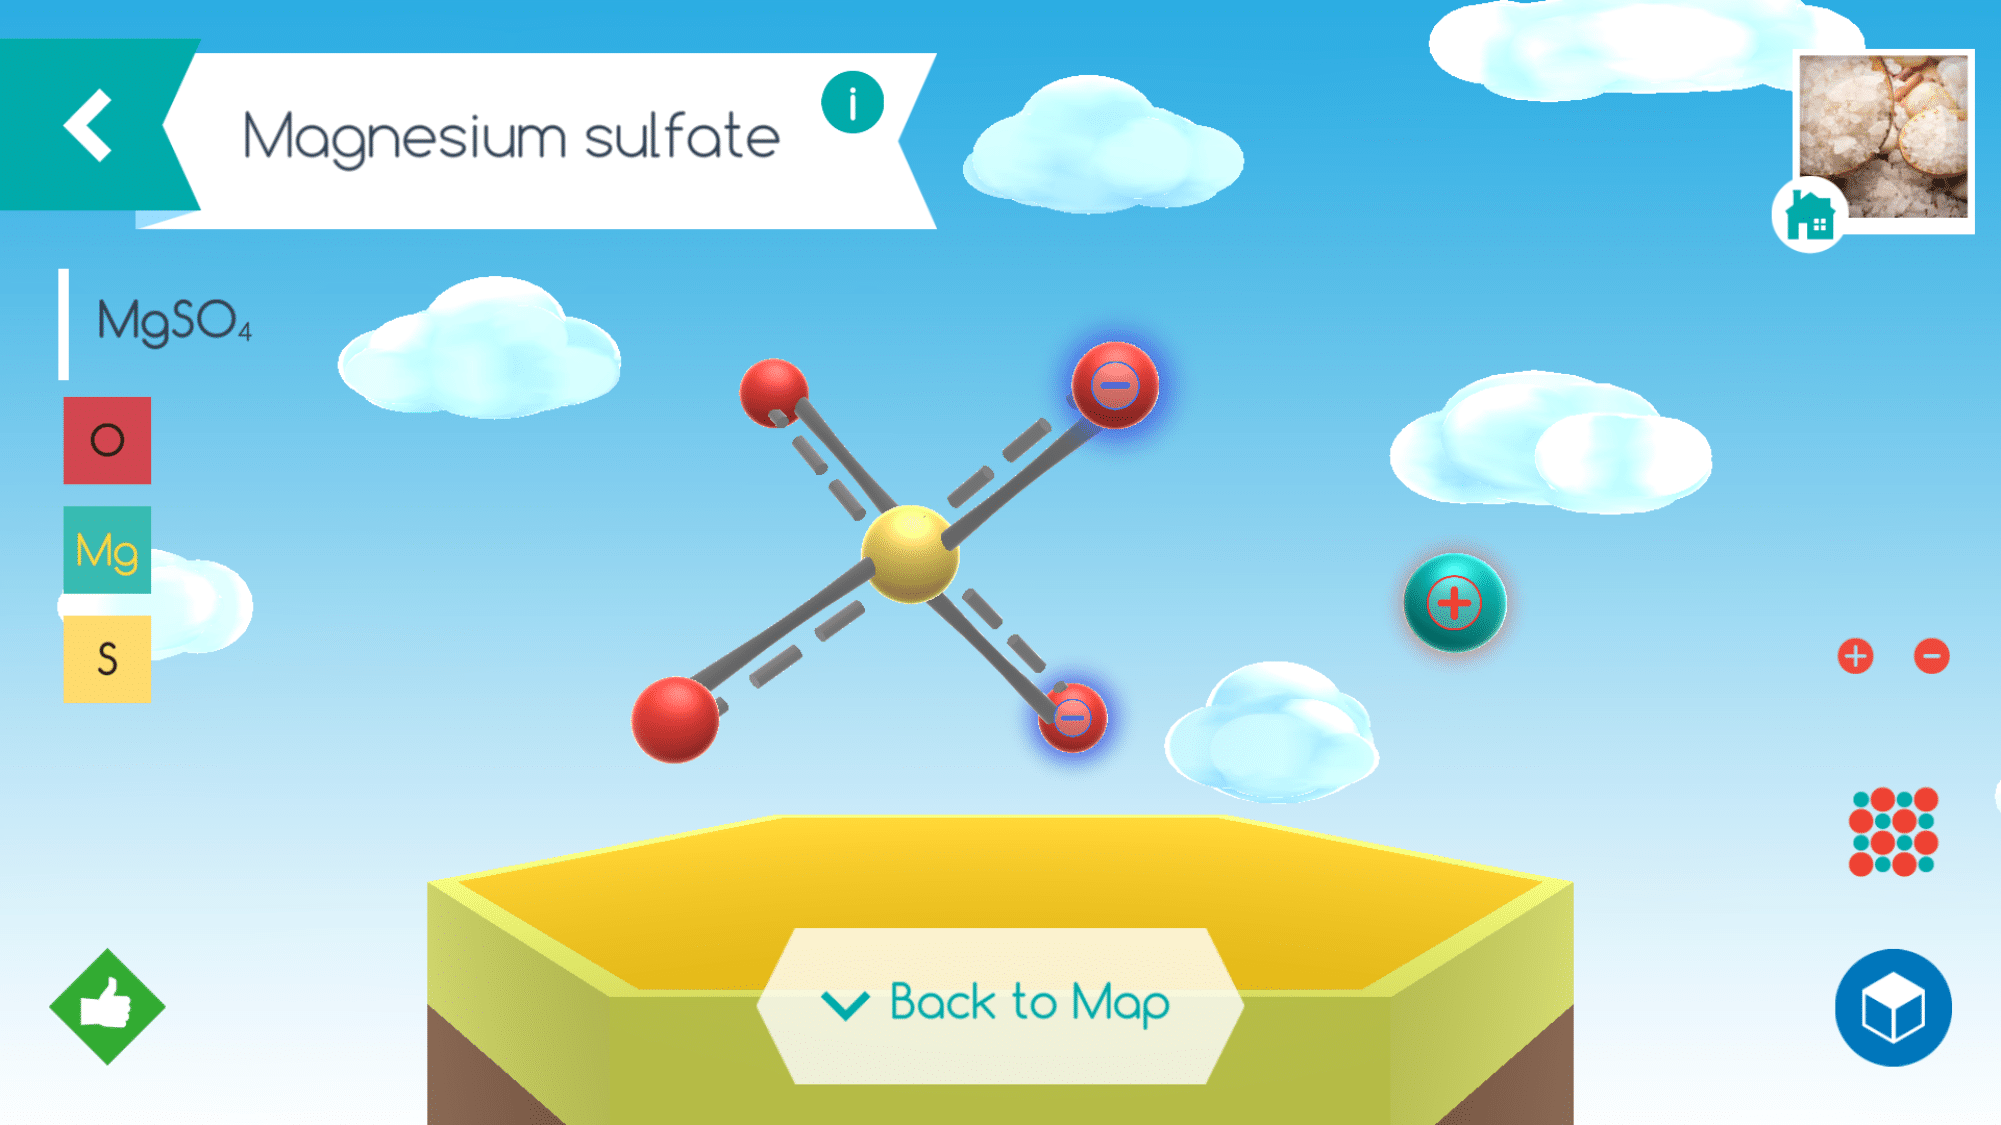 Screen shot image from the digital app Happy Atoms